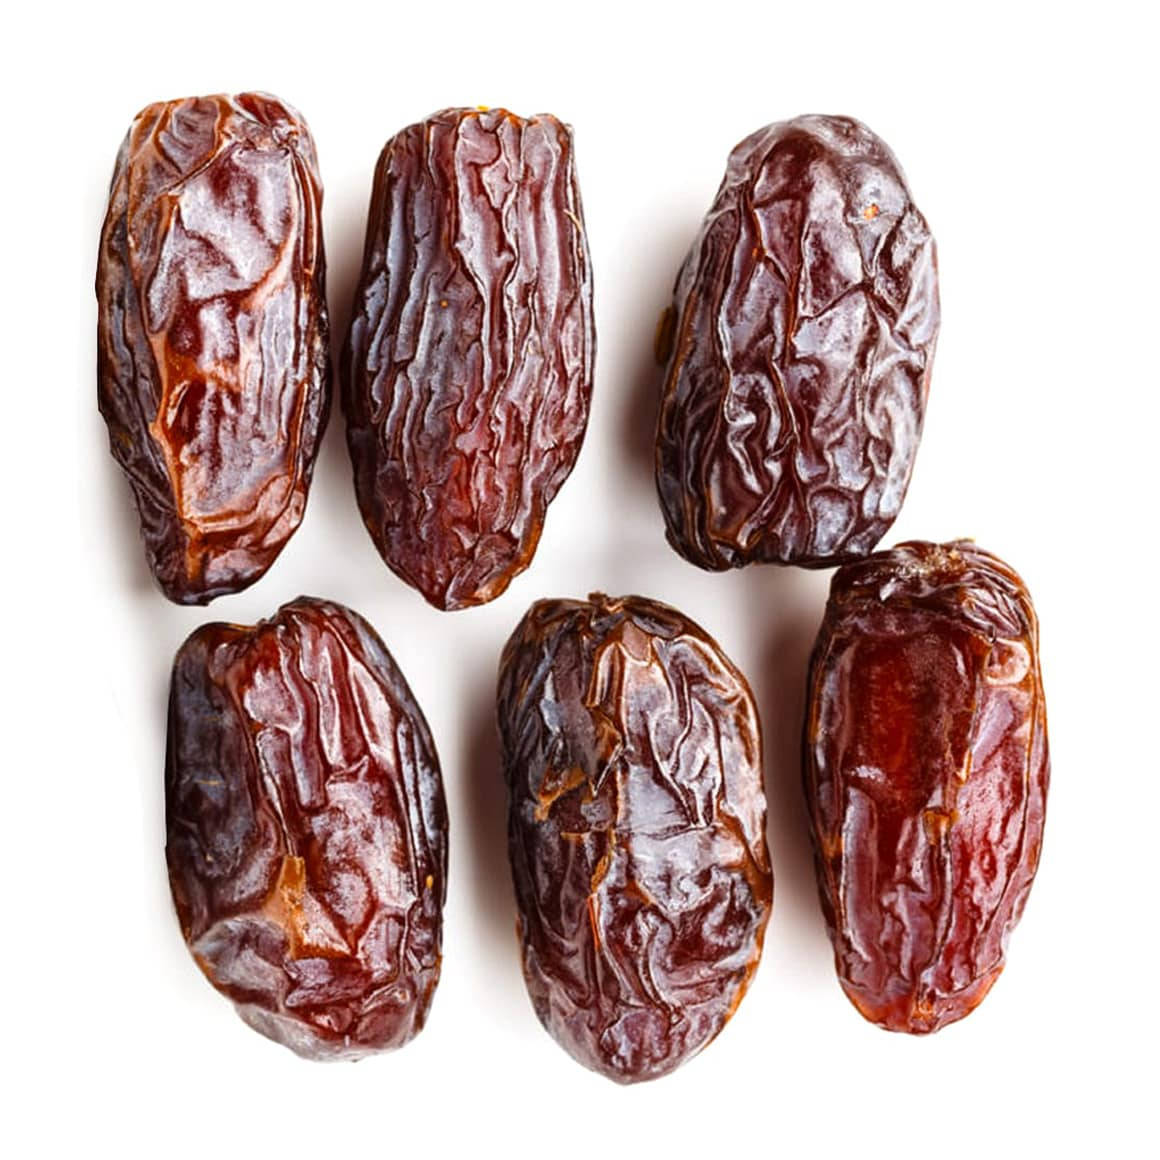 Dried Dates On White Surface Wallpaper